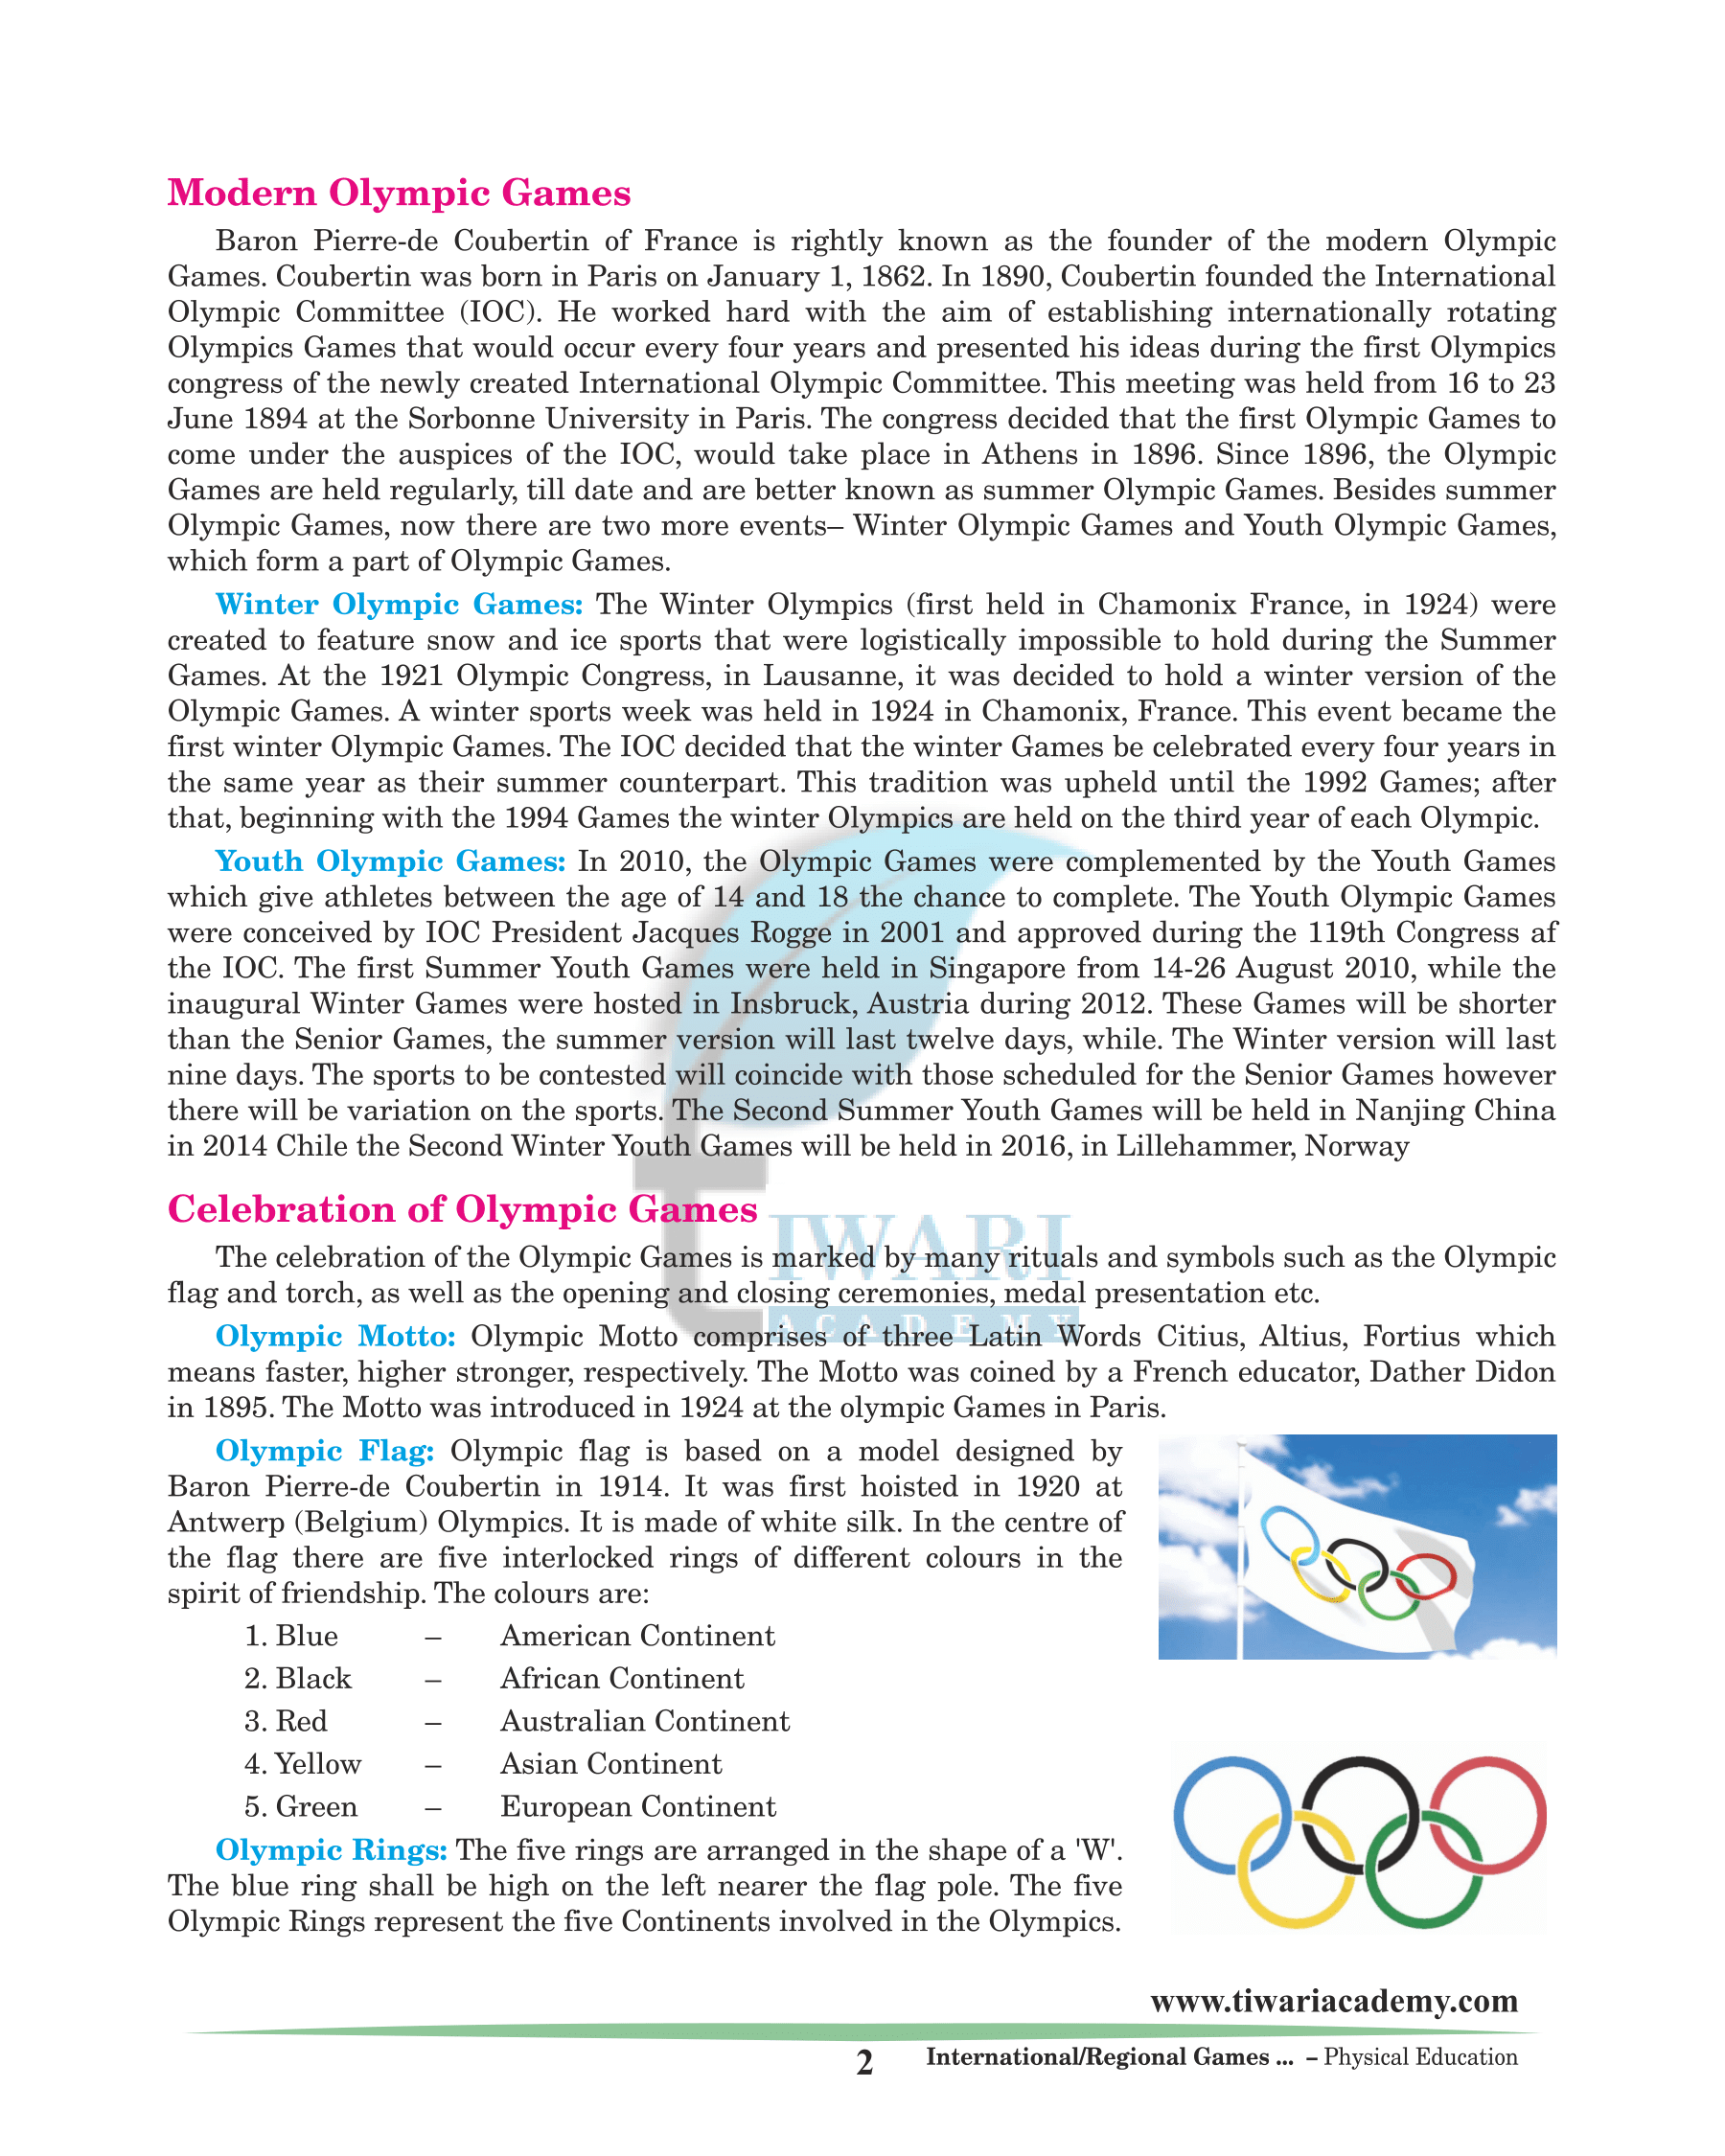 What is Olympics games?